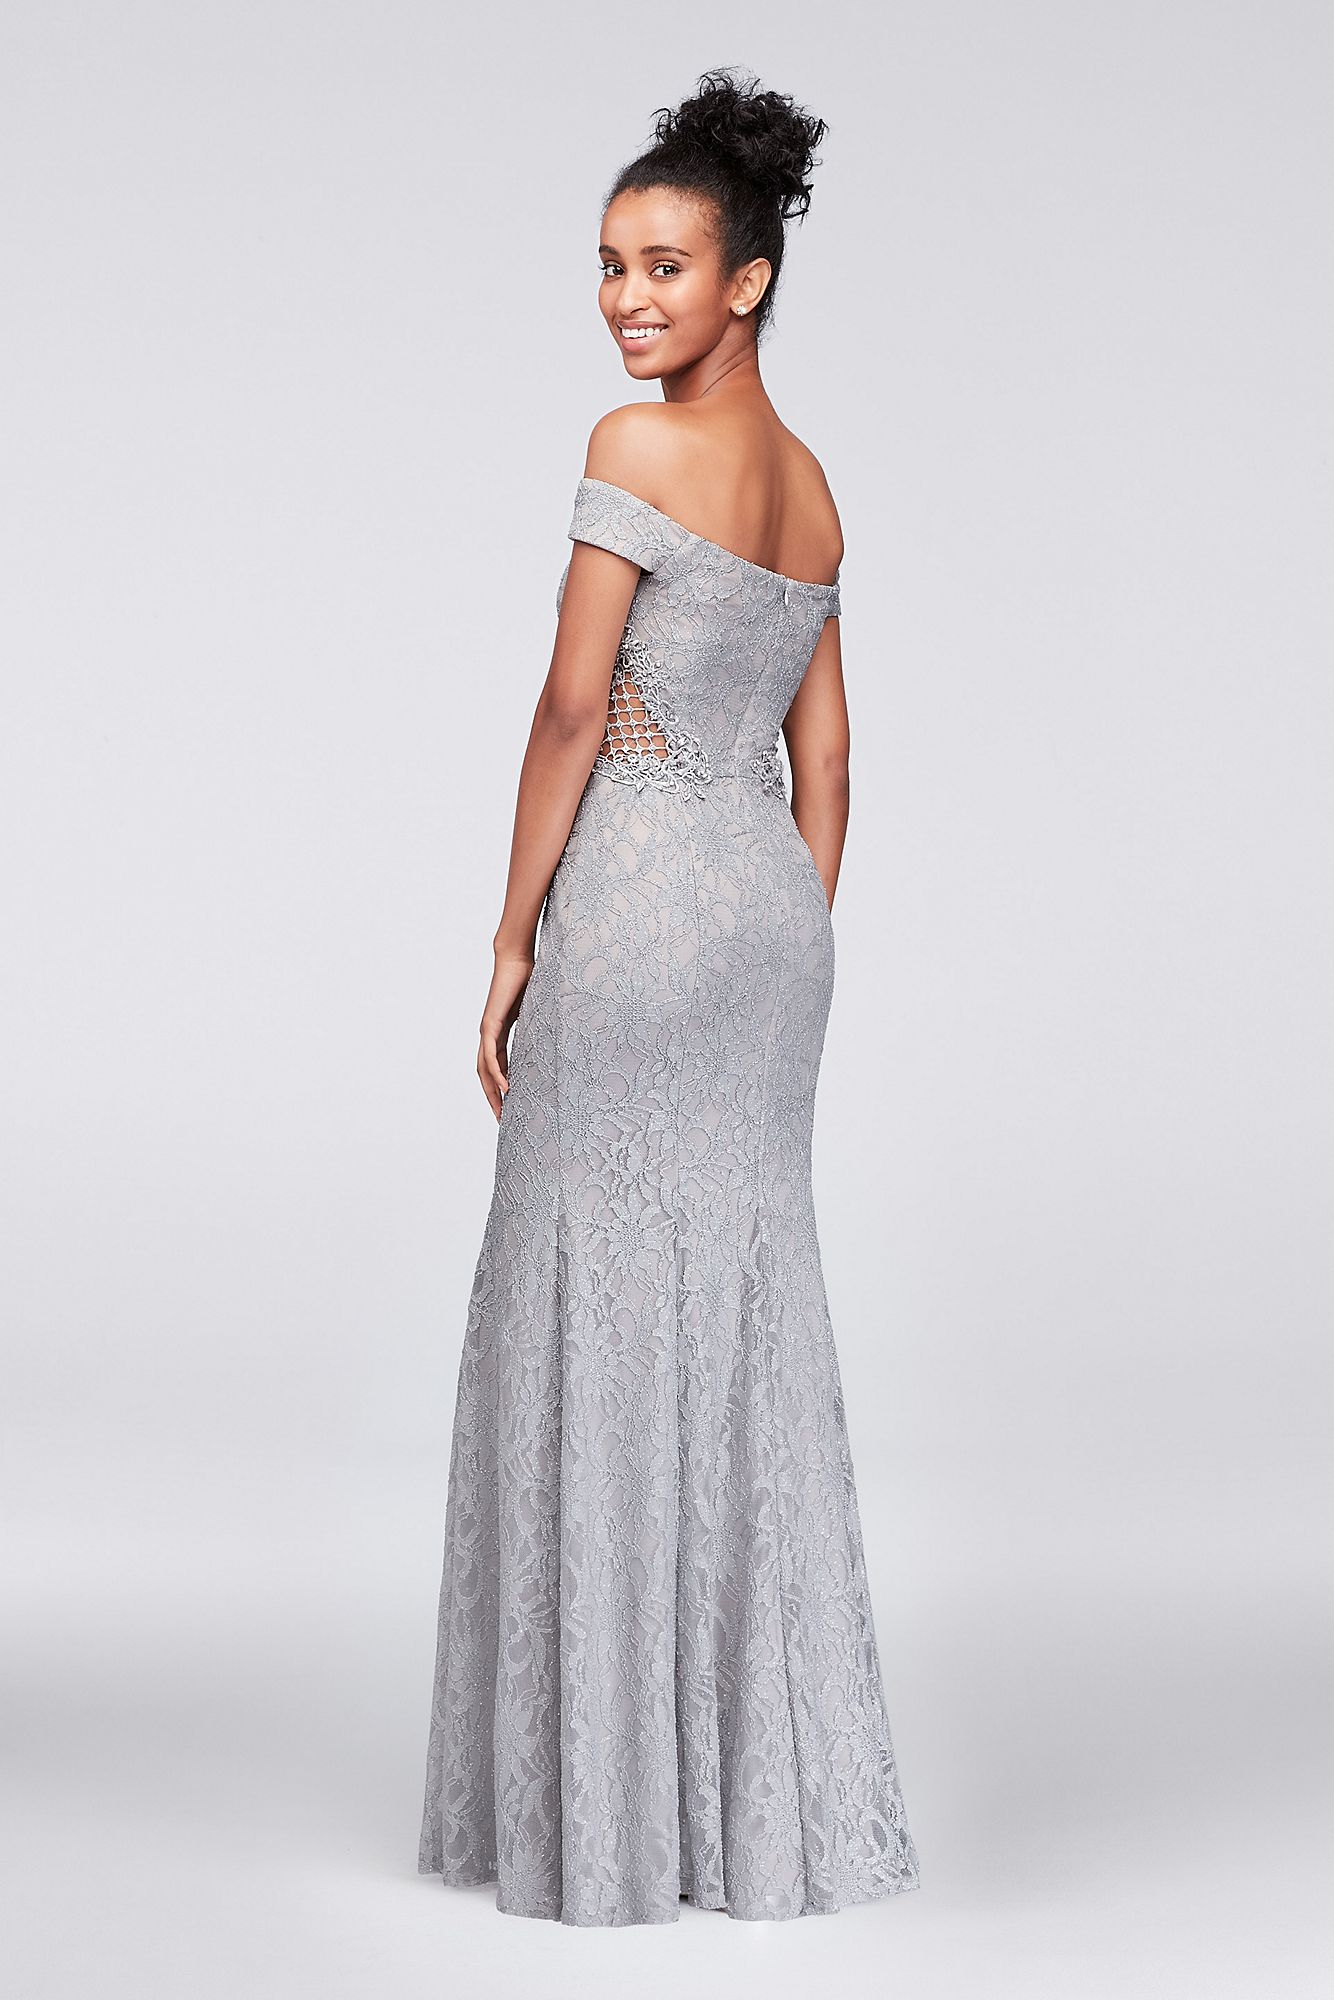 Lace Off-The-Shoulder Gown with Beaded Sides 3622HN7B